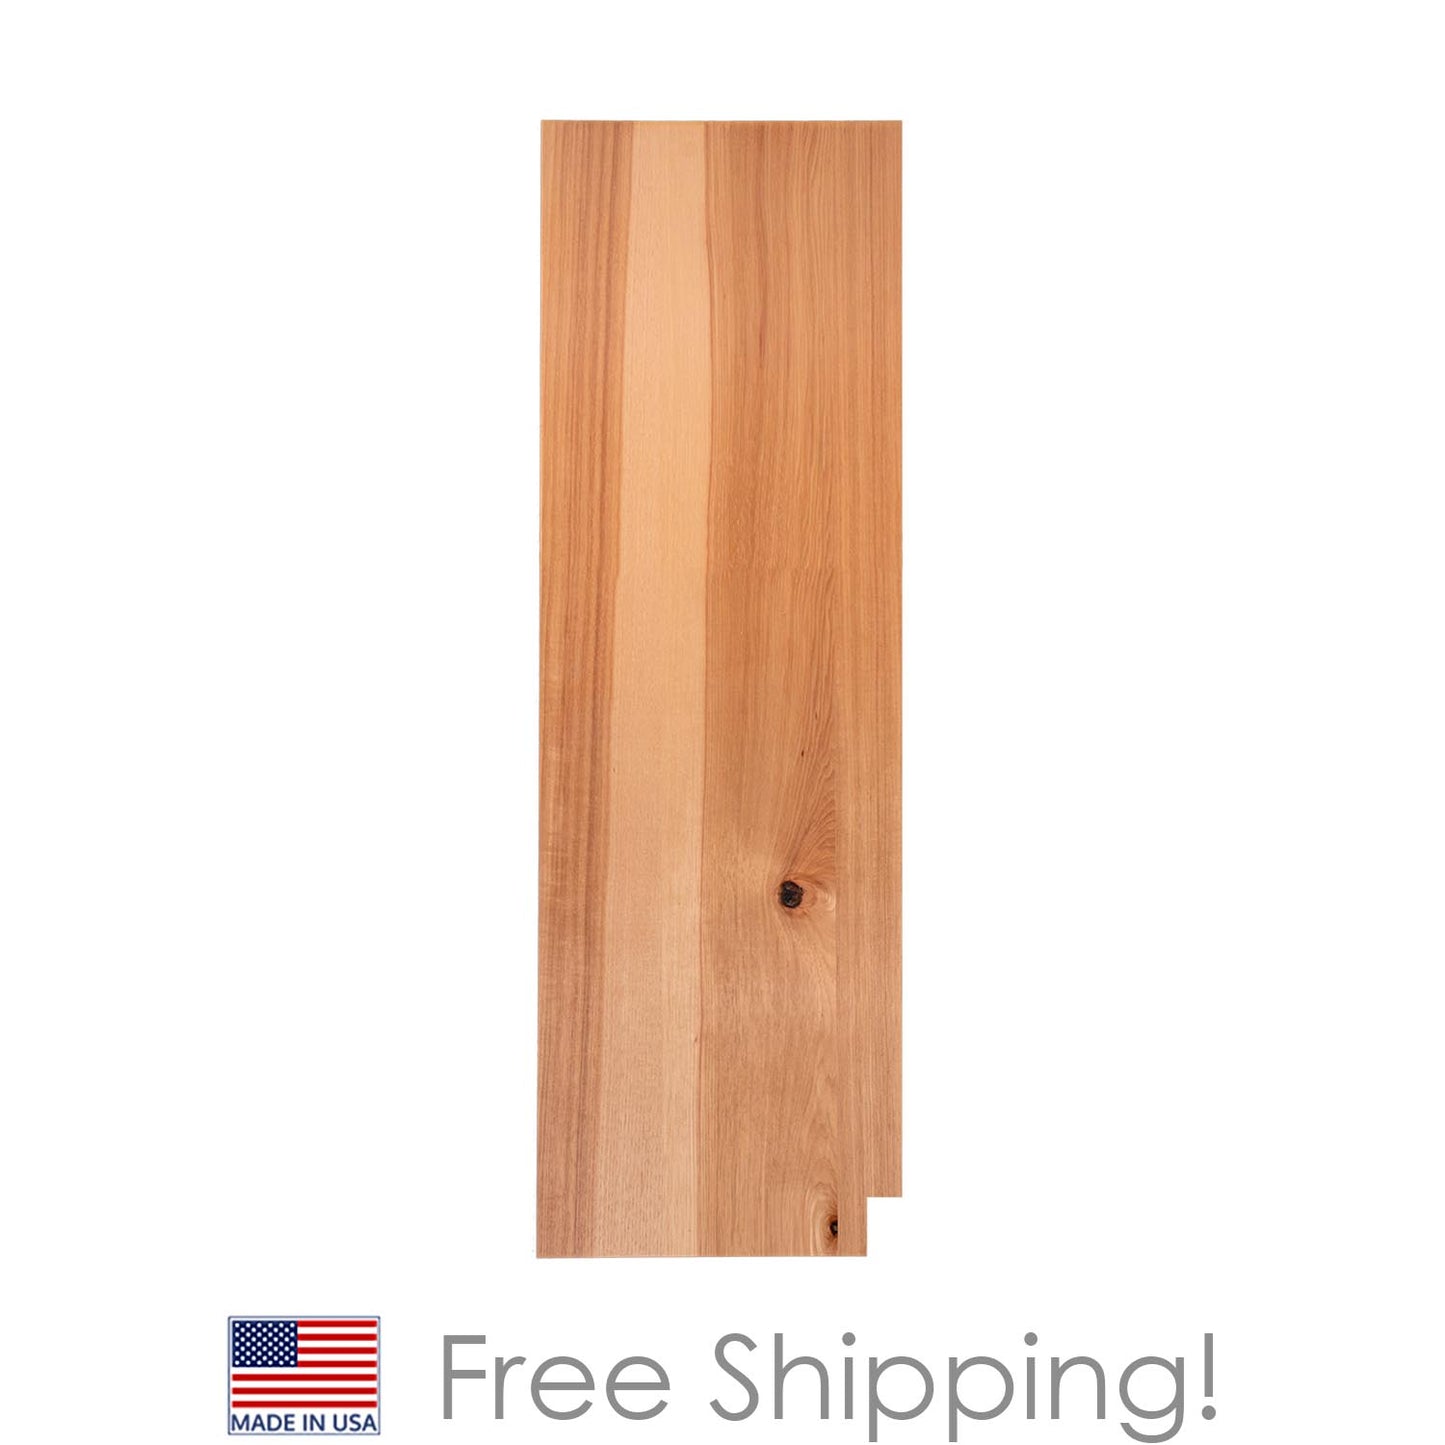 Quicklock RTA (Ready-to-Assemble) Rustic Hickory .25"X23.25"X90" Pantry End Panel - Left Side